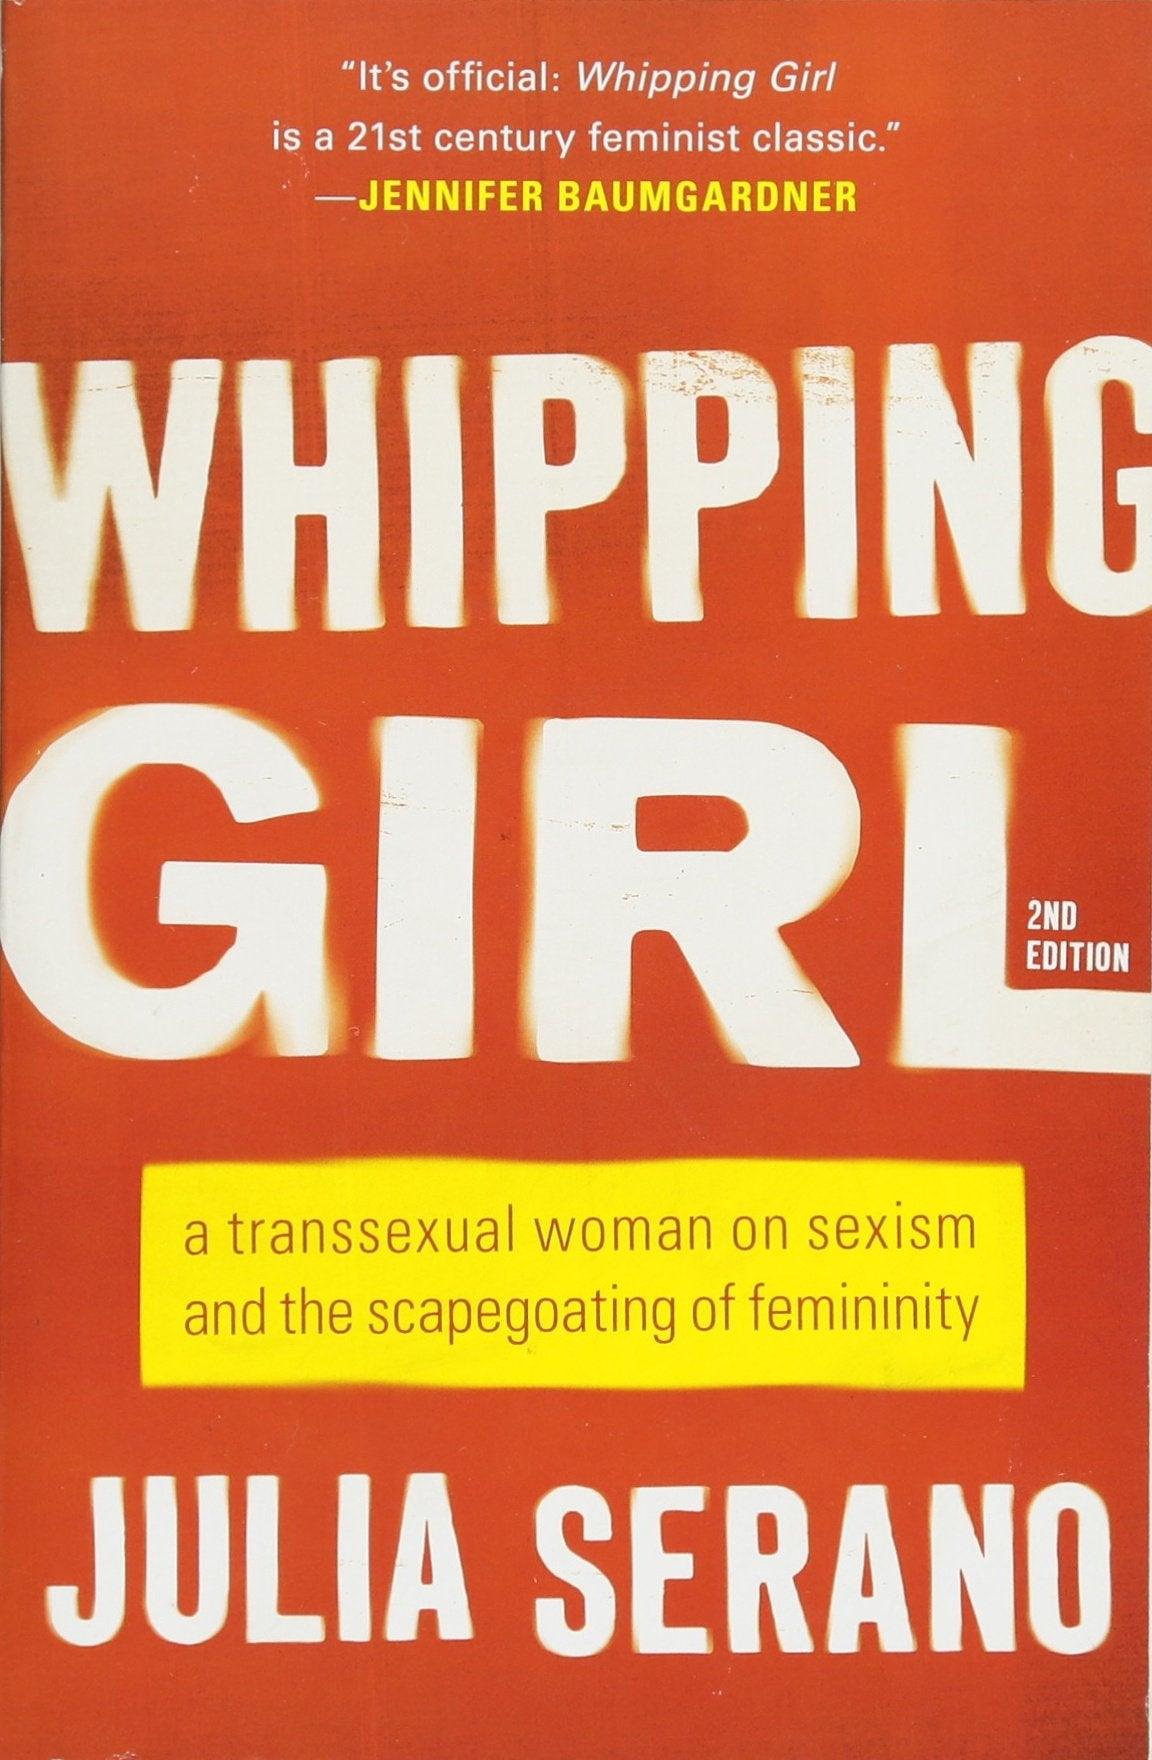 Whipping Girl: A Transsexual Woman on Sexism and the Scapegoating of Femininity - ShopQueer.co